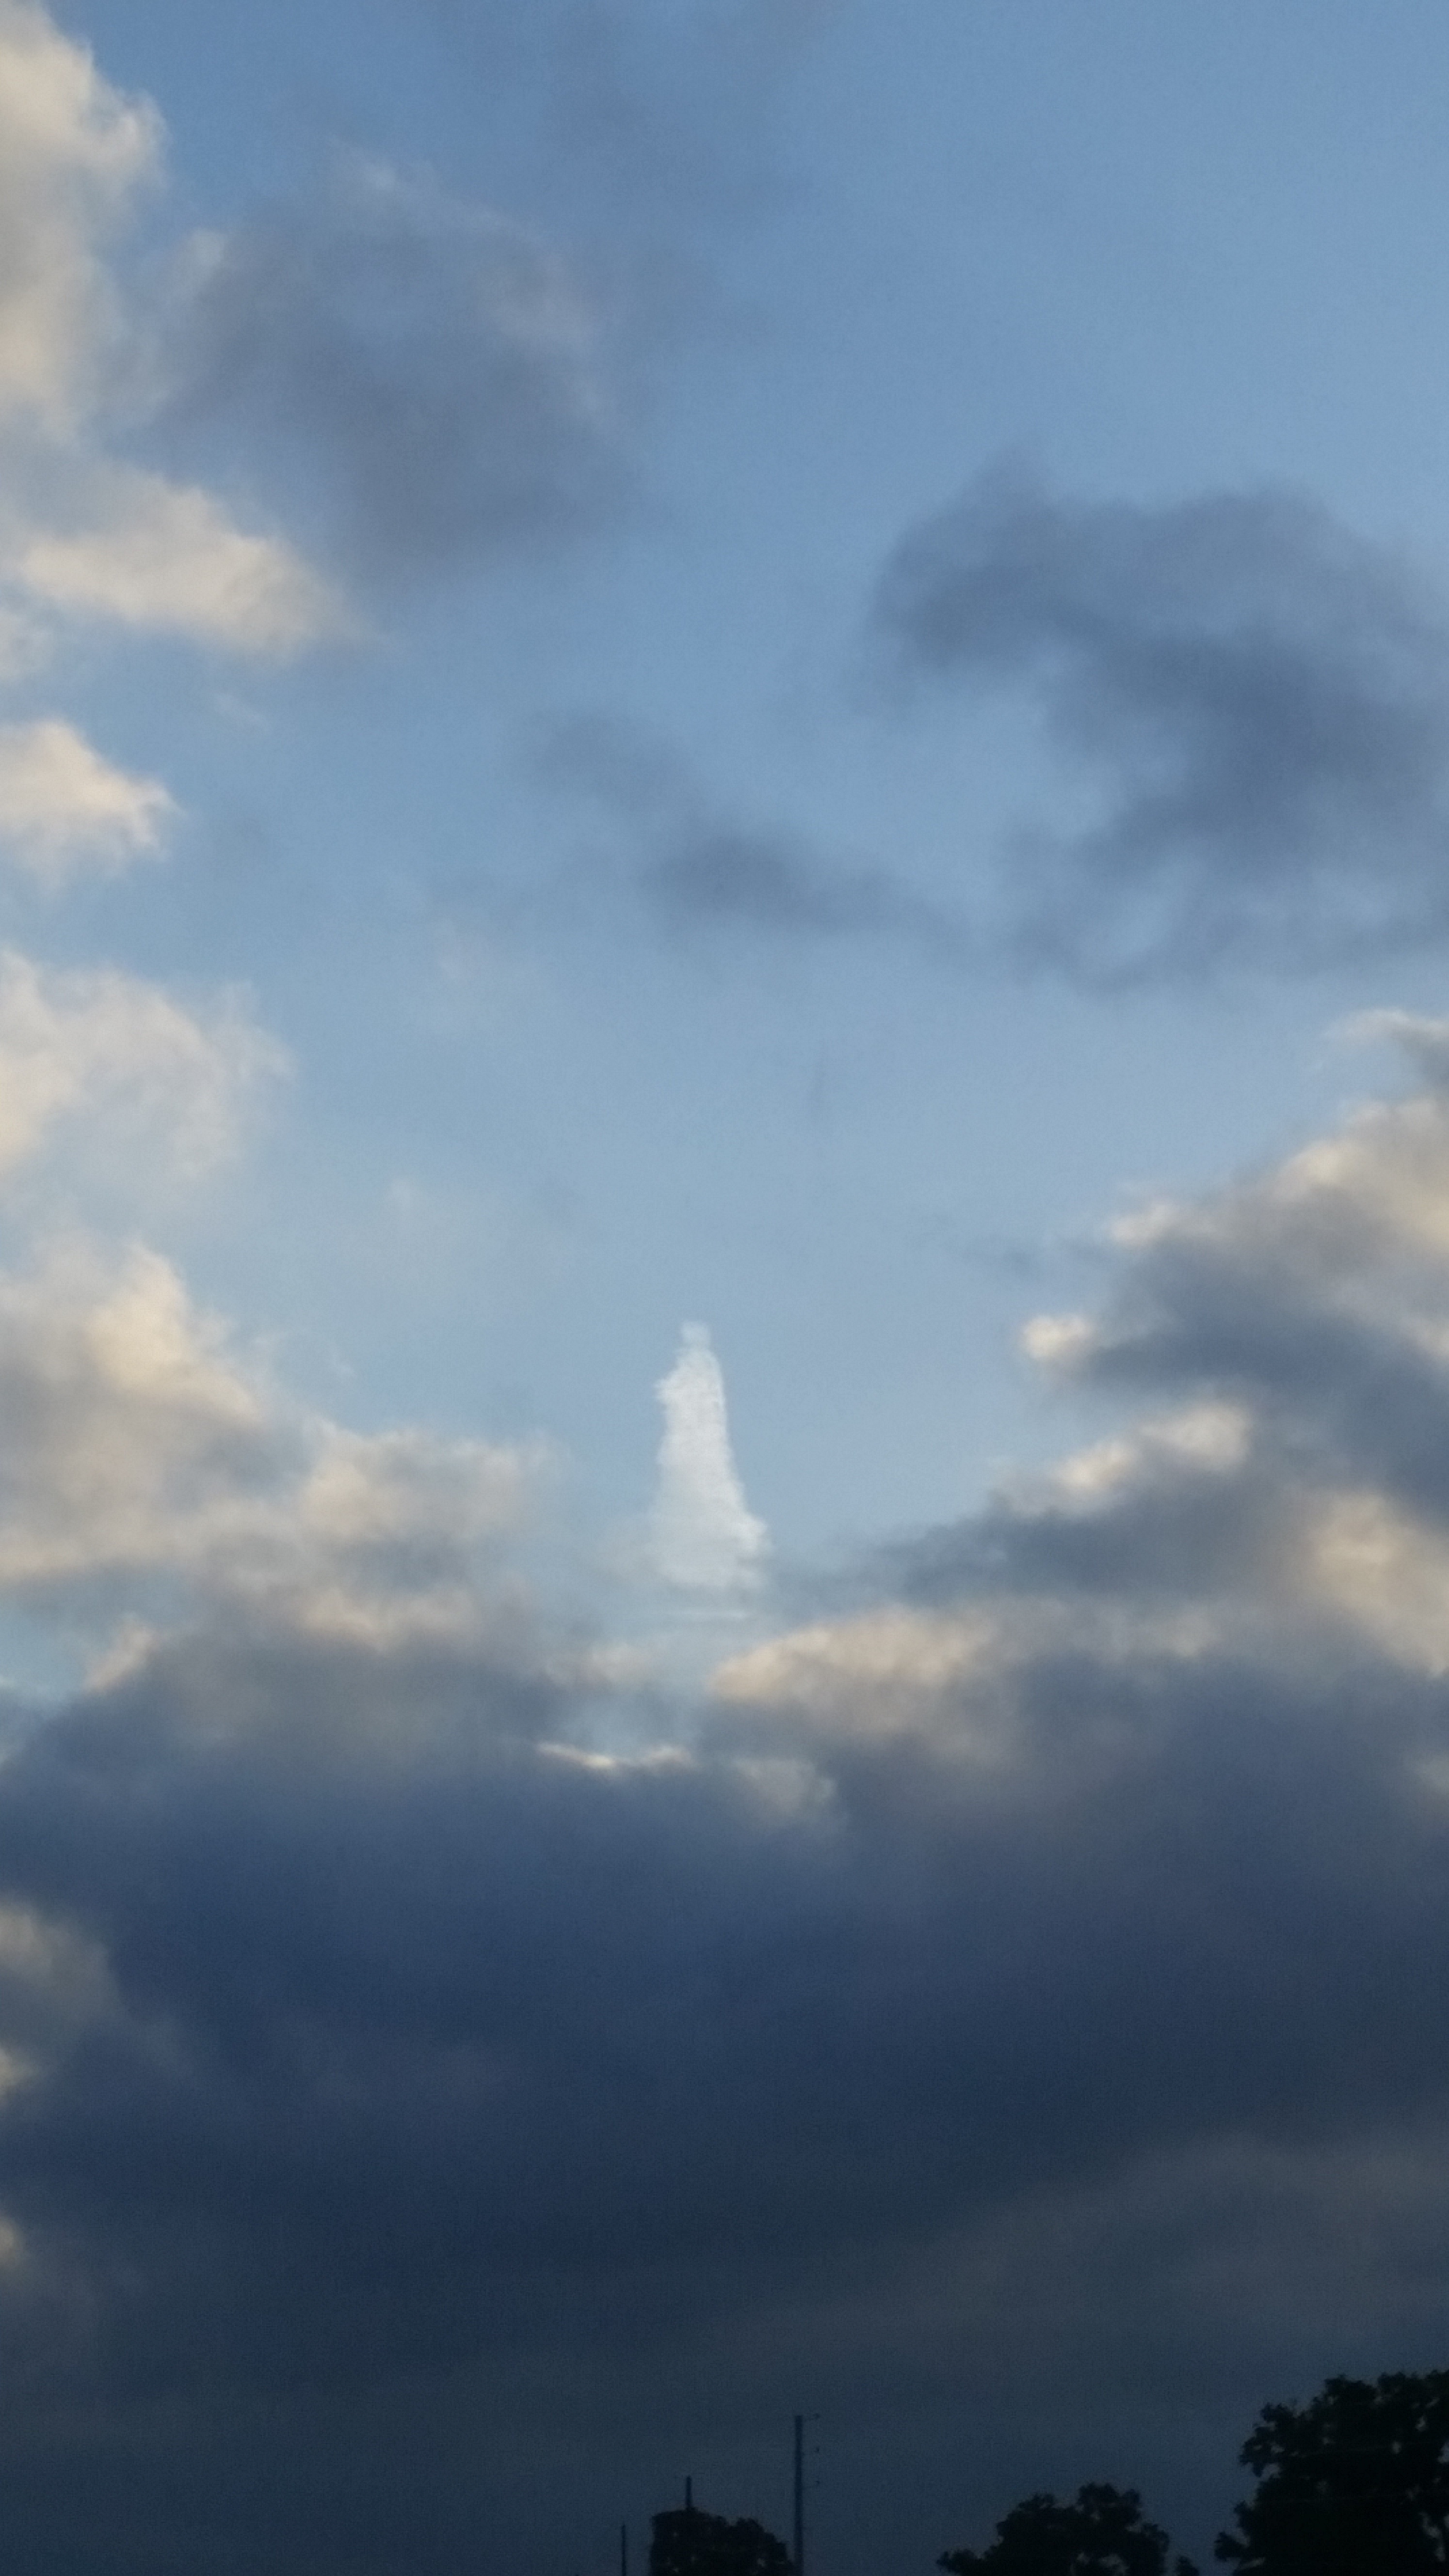 jesus cloud, jesus in the sky, jesus in the clouds, cloud ressembling jesus, cloud shaped like jesus,, Divine apparition? Jesus in a cloak spotted over Madisonville in Texas . Photo: Britney Gibbs, is this jesus in the clouds: Madisonville woman spots Jesus in the clouds over Texas may 2014, jesus cloud texas may 2014 photo, strange cloud form: jesus in the sky, this strange cloud represents jesus in Texas may 2014 photo, Divine apparition?Jesus in a cloak spotted over Madissonville in Texas . Photo: Britney Gibbs